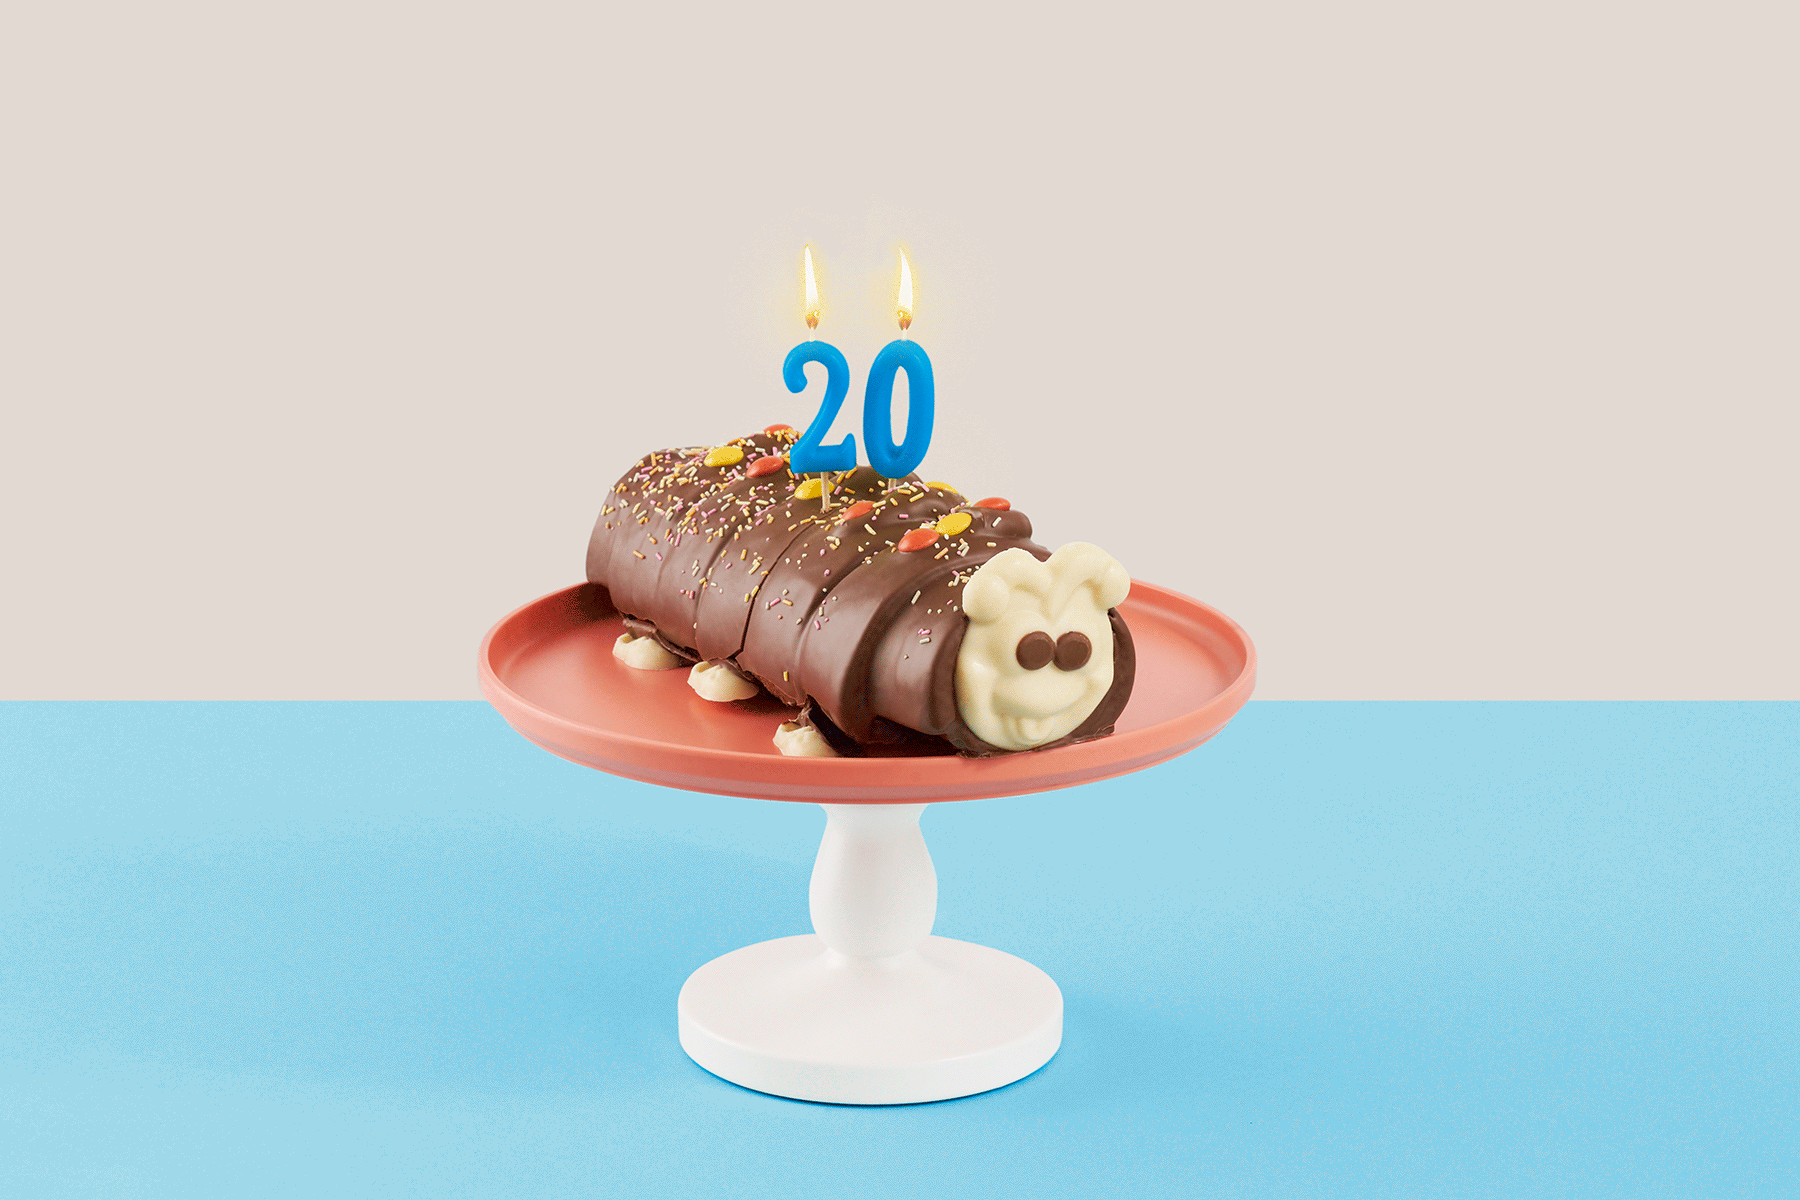 A photo of a caterpillar cake with candles shaped like the number twenty atop; the candles flicker